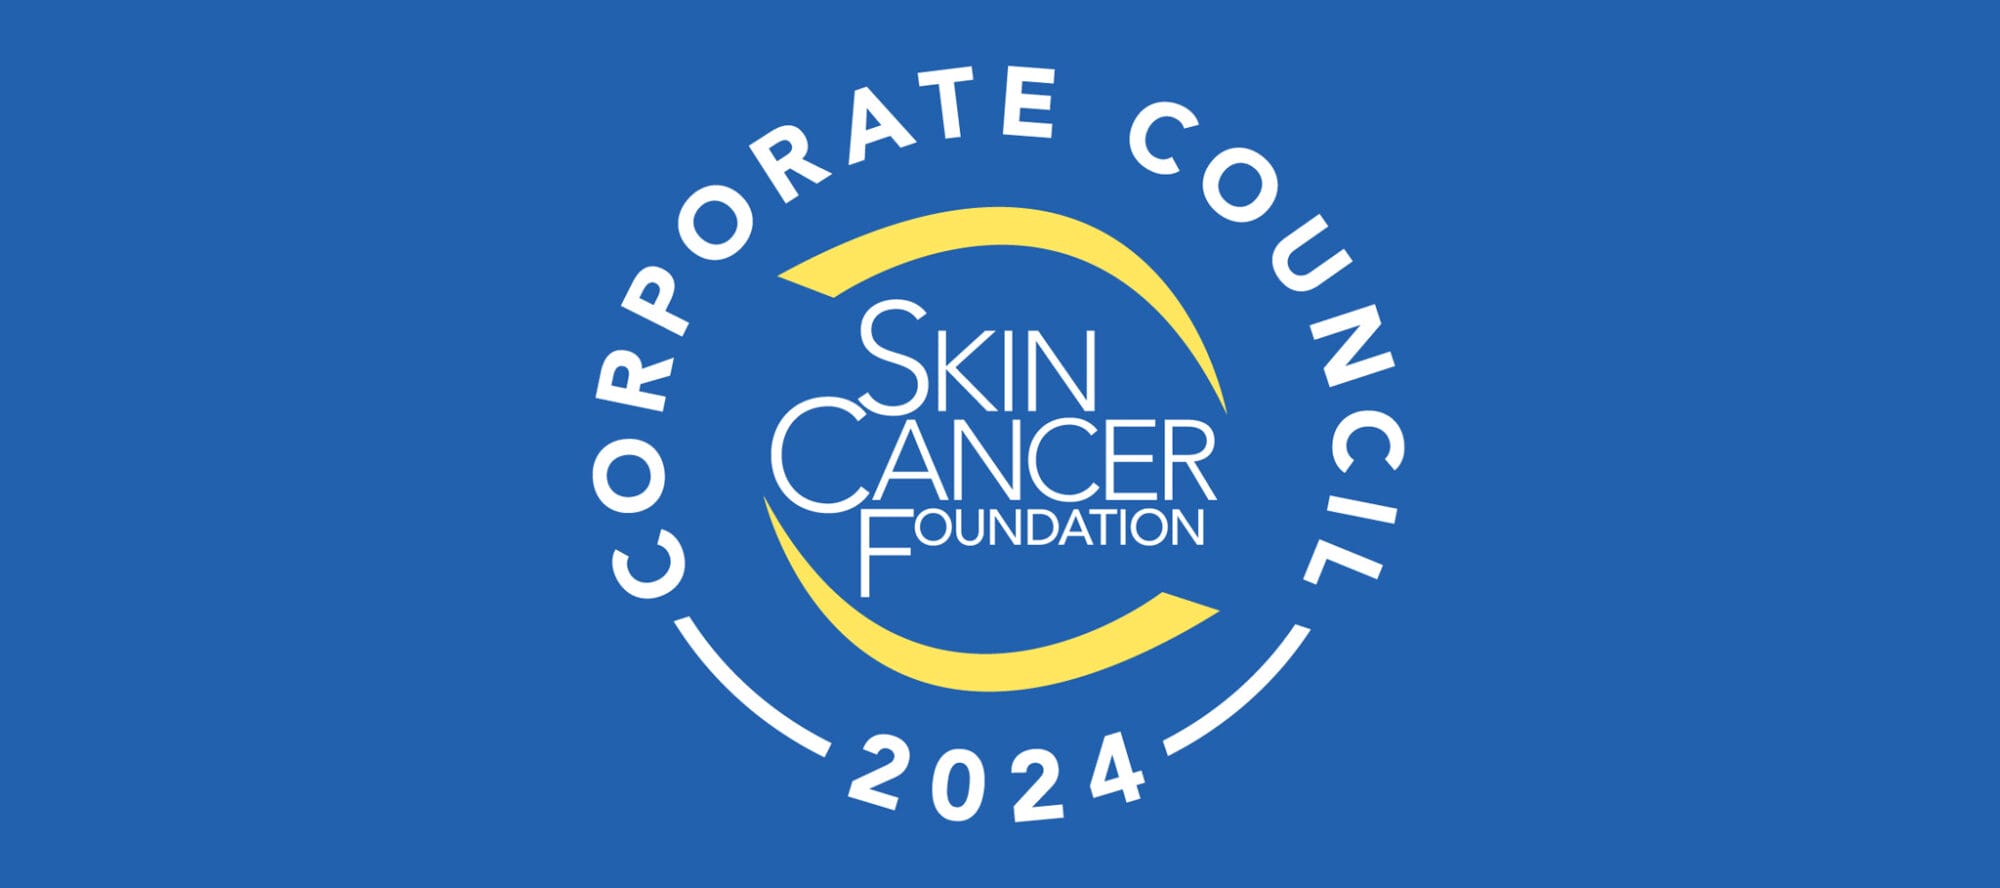 Skin Cancer Foundation Corporate Council